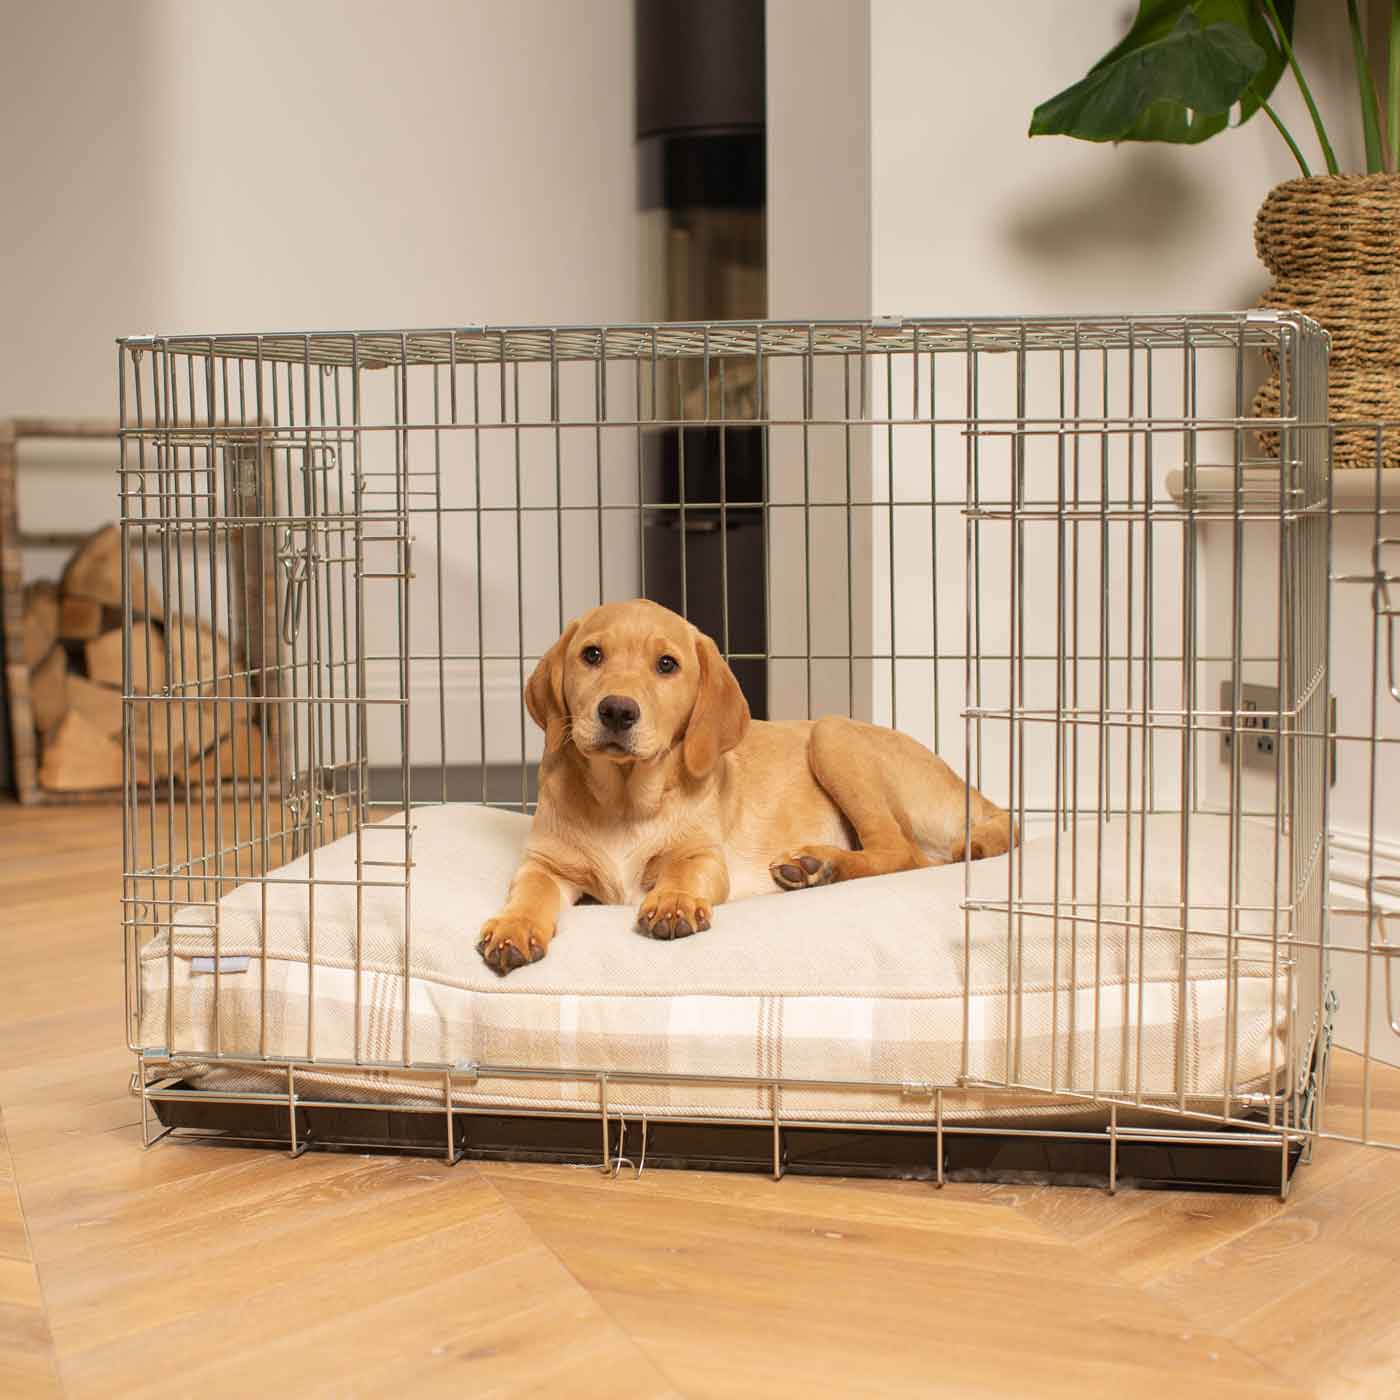 Luxury Dog Cage Cushion, The Perfect Dog Cage For The Ultimate Naptime, Now Available To Personalize at Lords & Labradors US